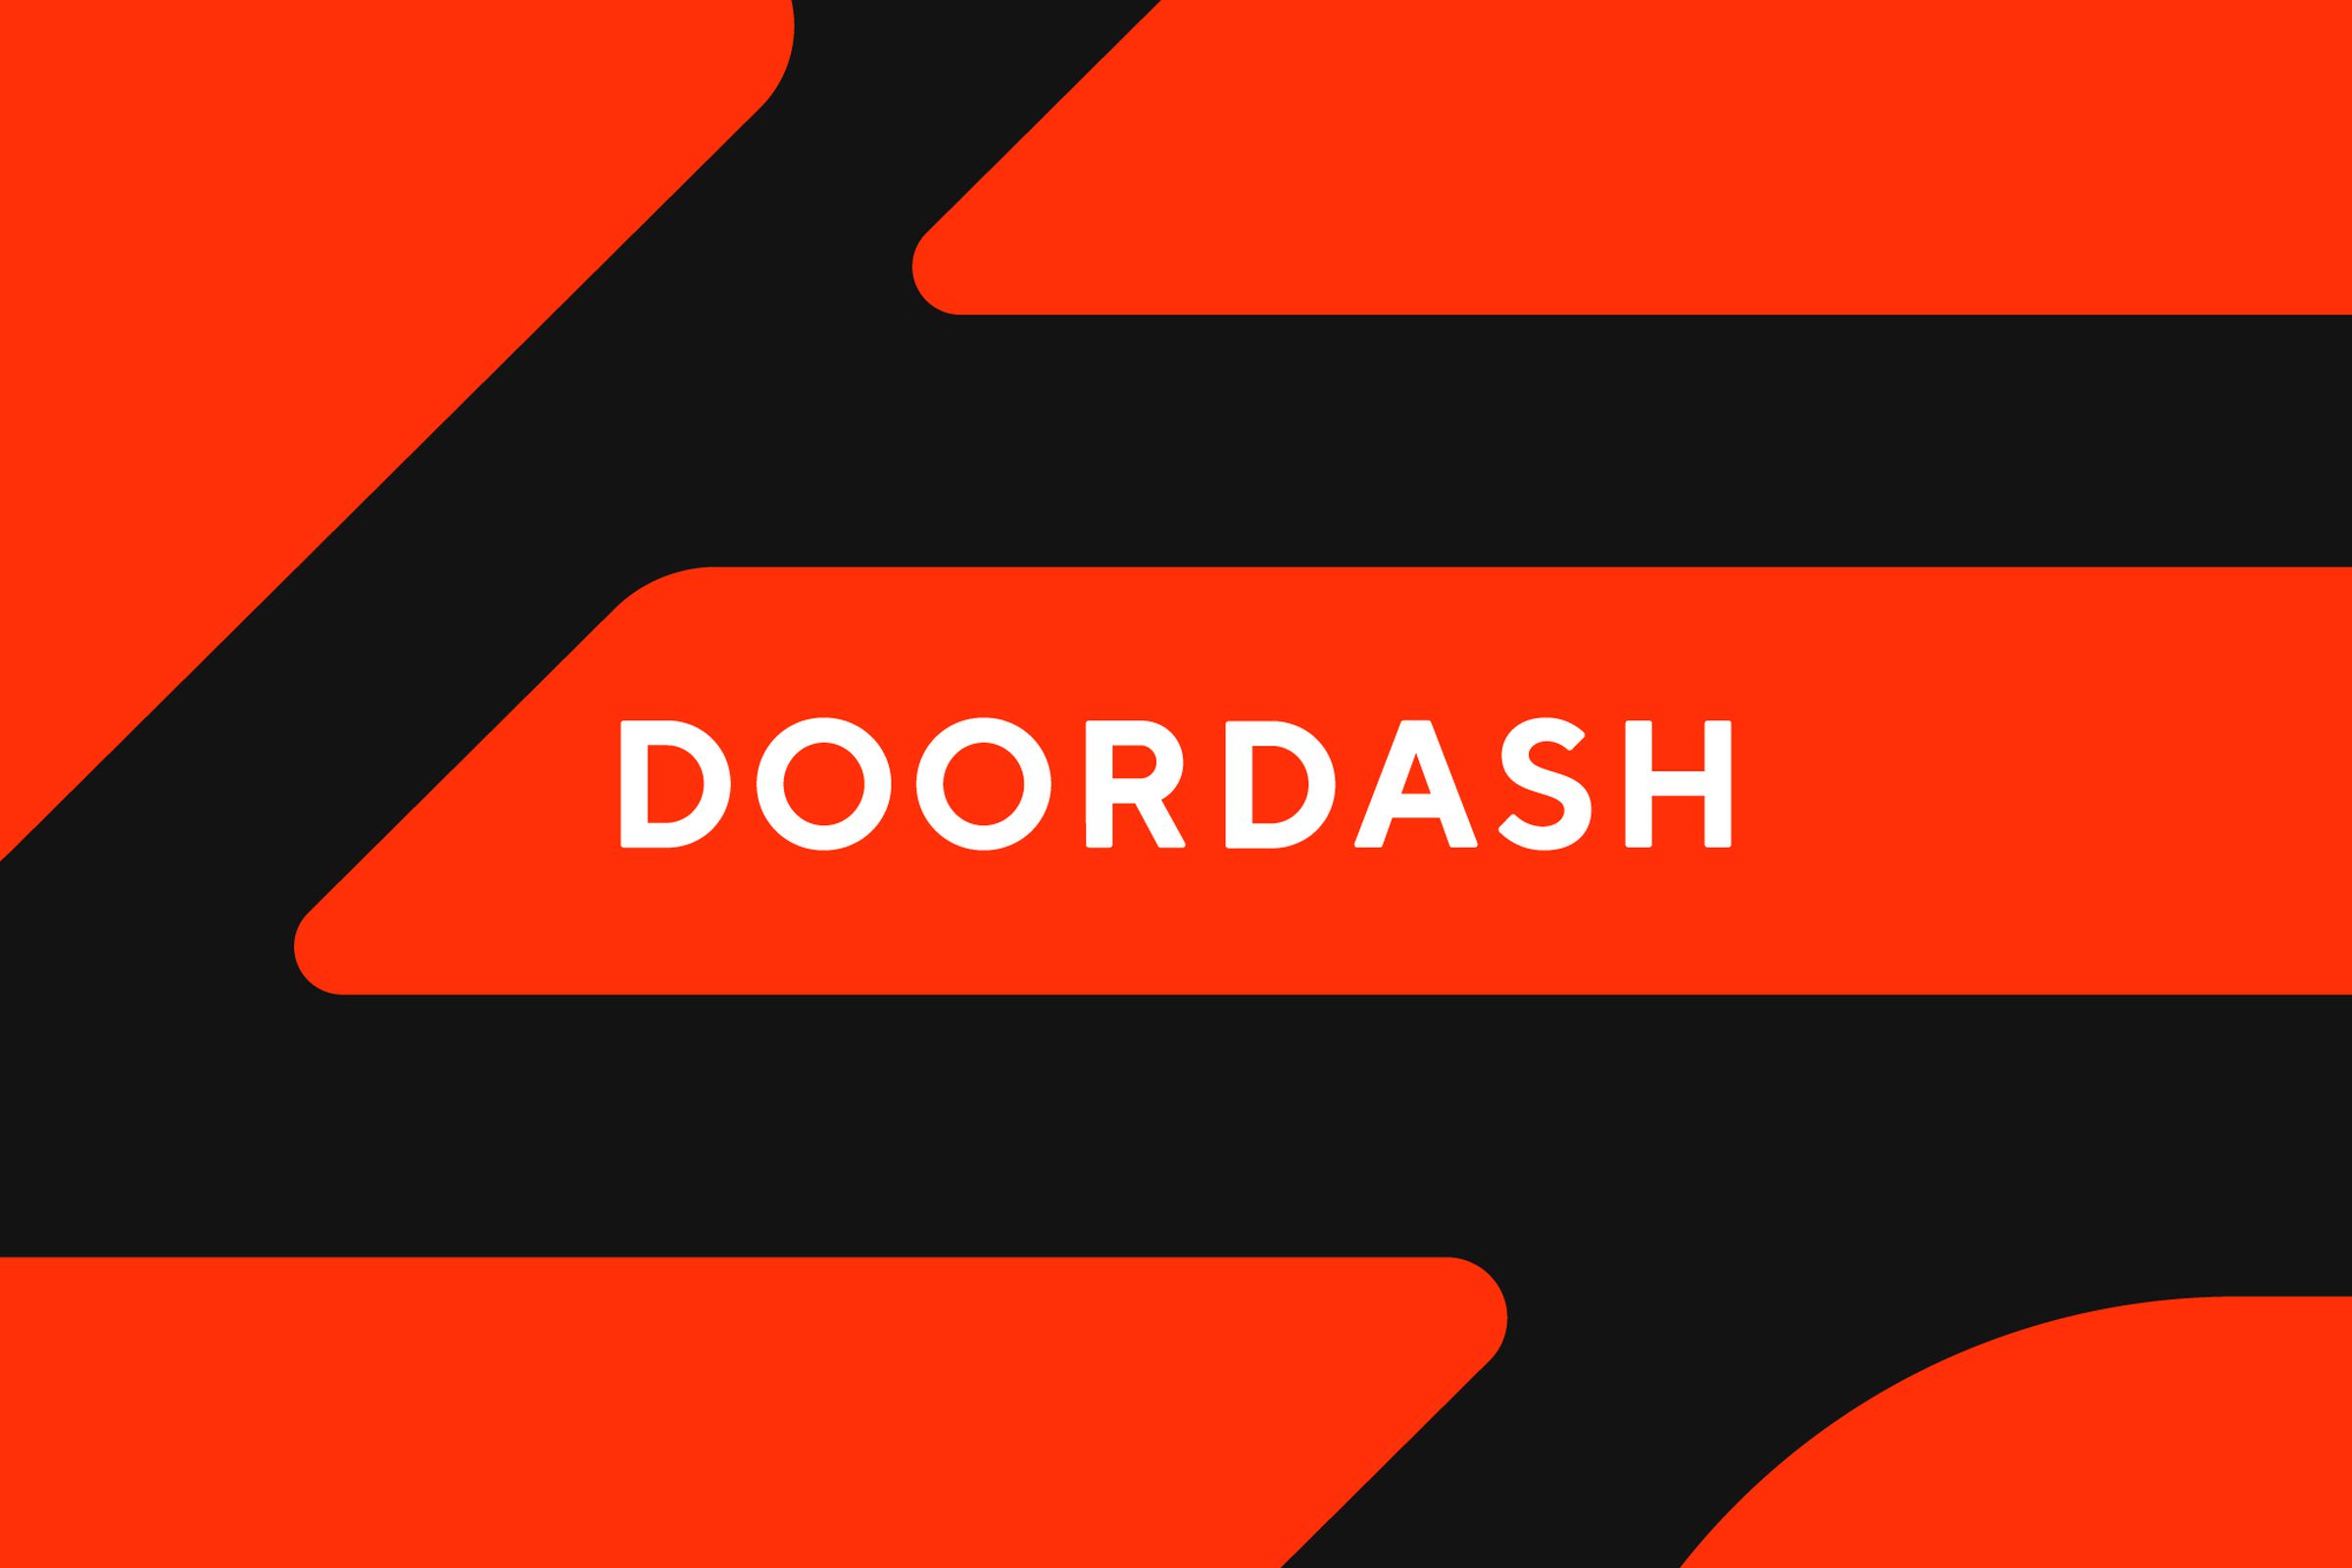 DoorDash’s logo on a black and red background